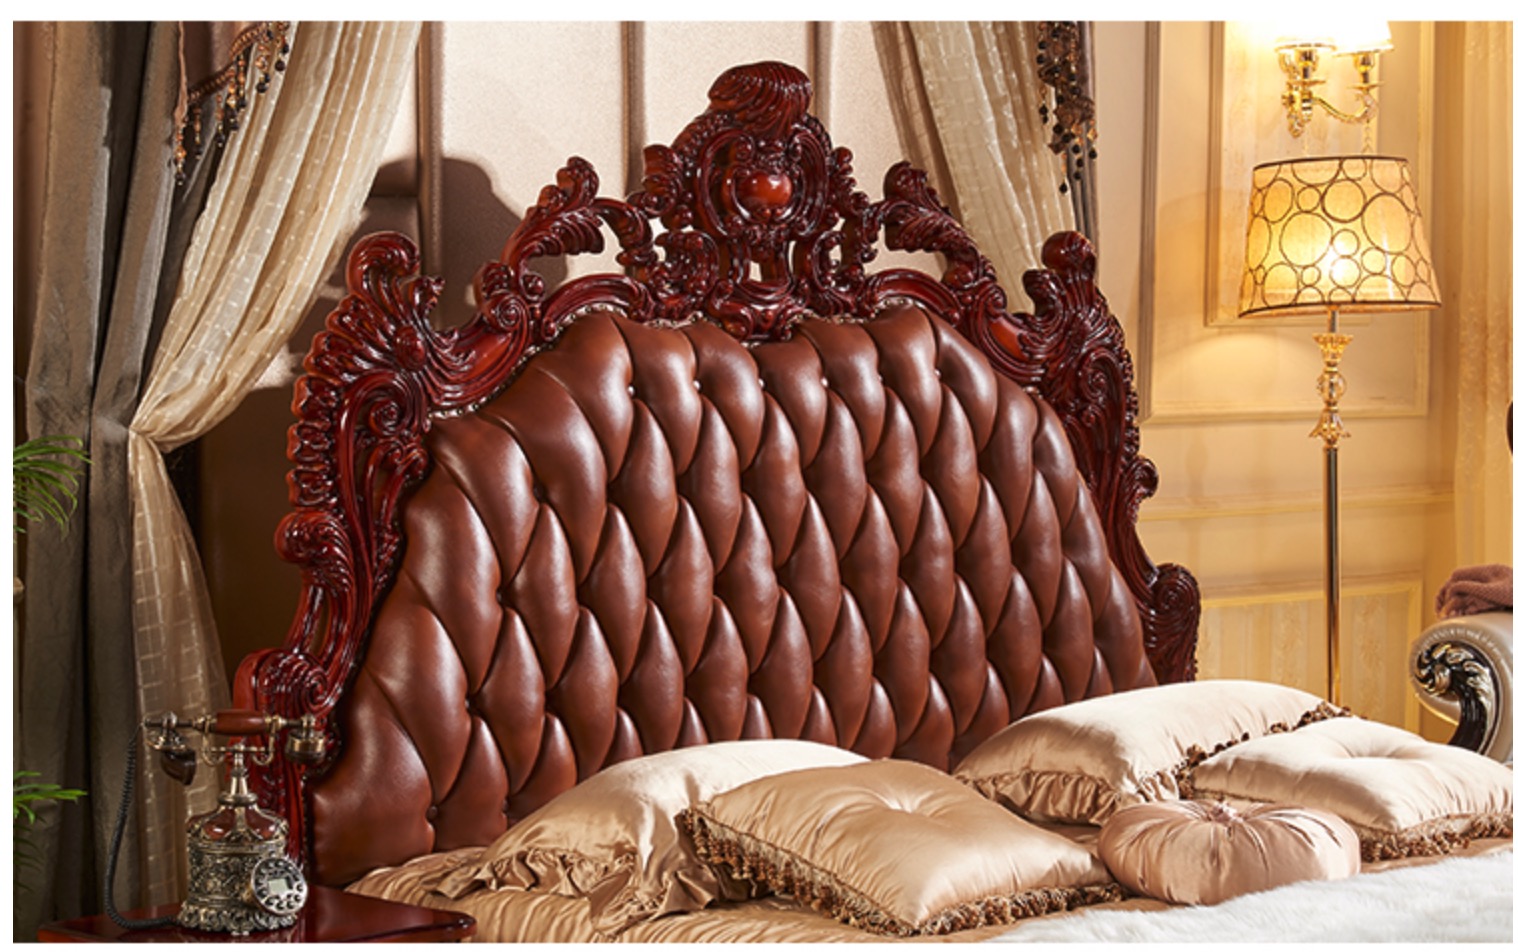 The best furniture photography is in China. Beddings